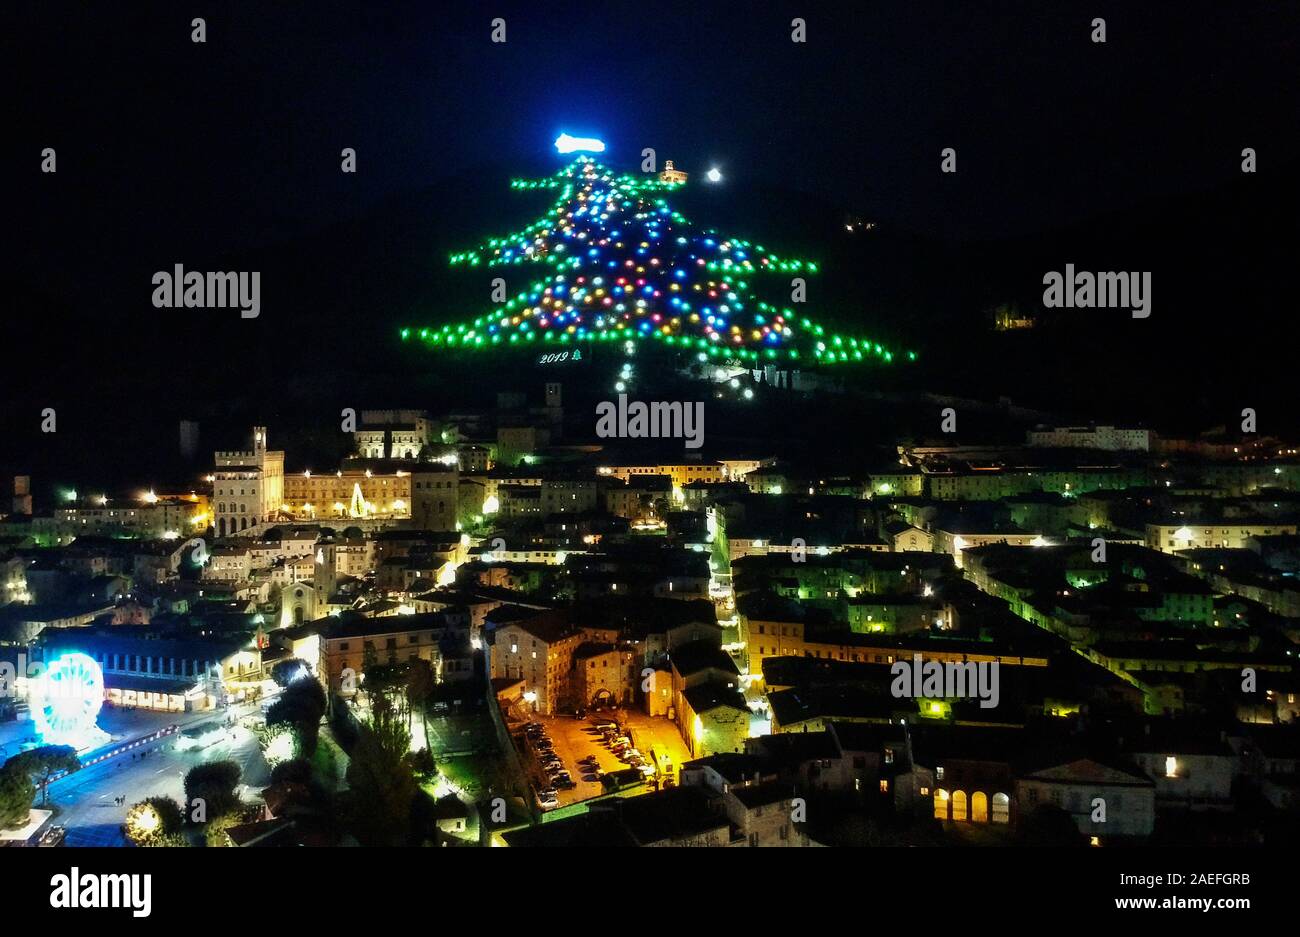 A Christmas Tree Decorates Monte Ingino Which Dominates The City Of Gubbio In The Umbria Region The Tree Is 650 Meters Long With An Area Of About 1 000 Square Meters And Covered